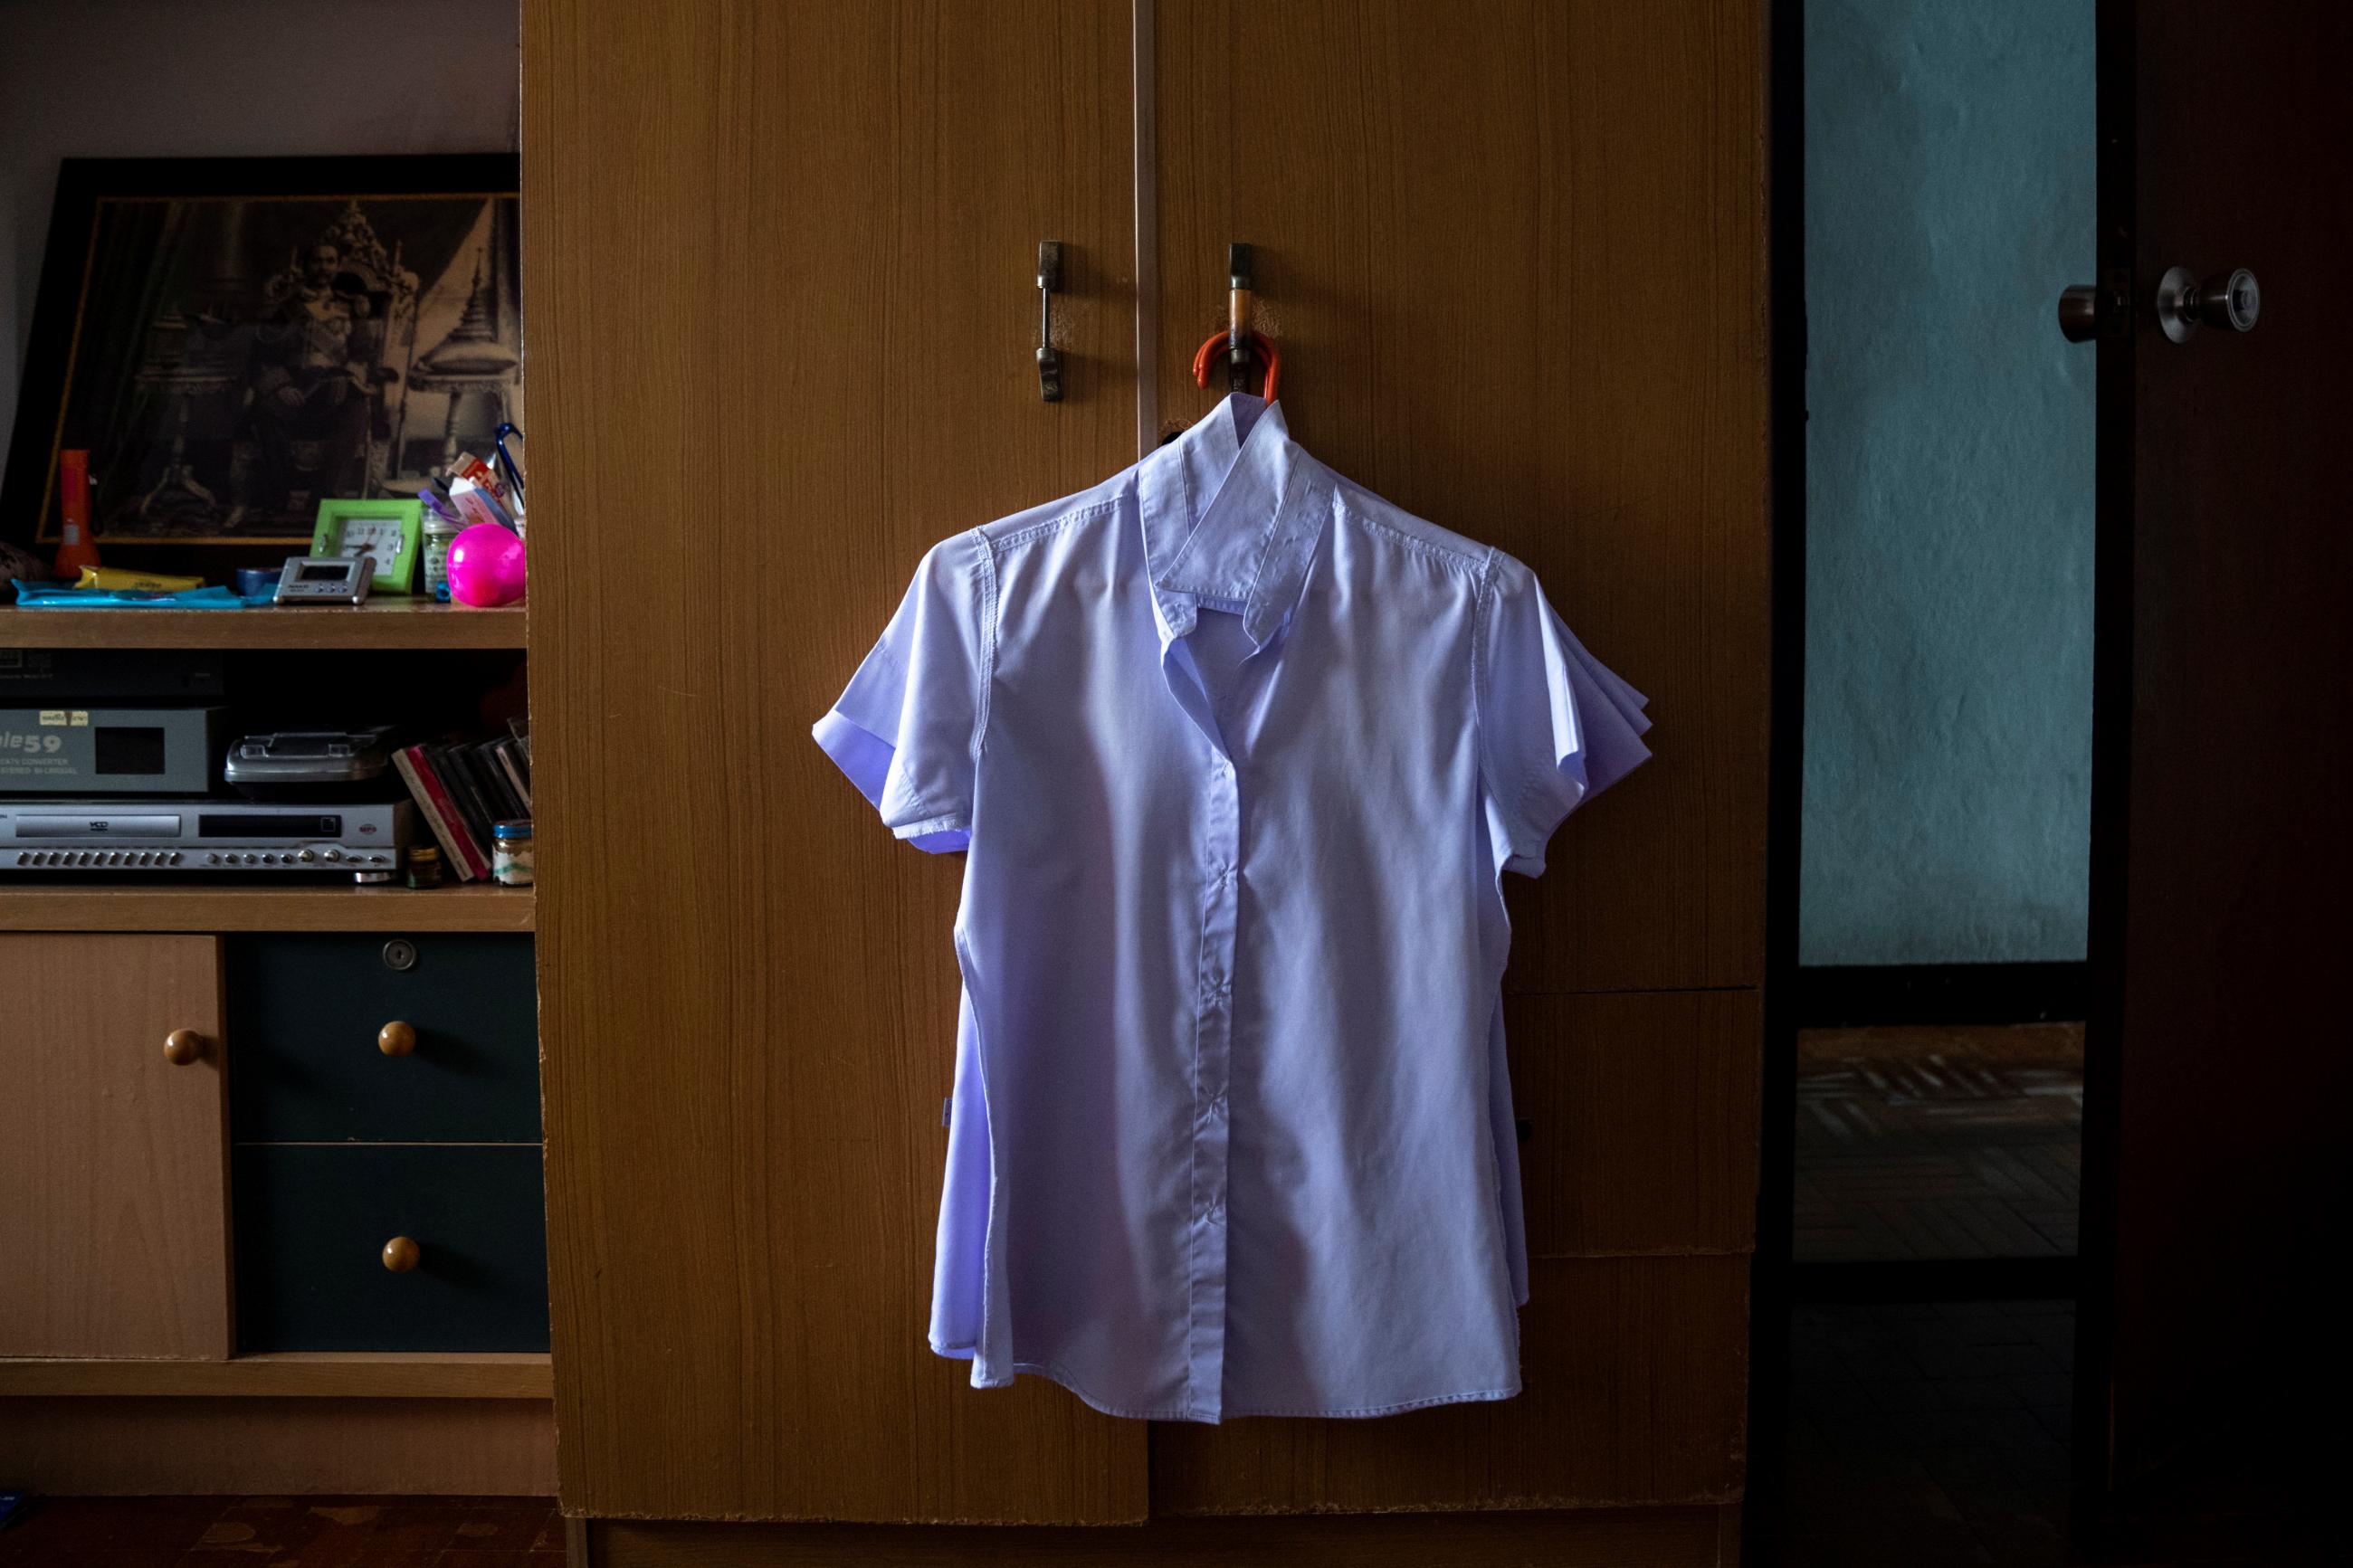 A work uniform hangs in the wardrobe of Nitiwadee Sae-Tia, 50, who took her own life after losing her job during the COVID outbreak in Bangkok, Thailand. Photo taken on May 26, 2020.